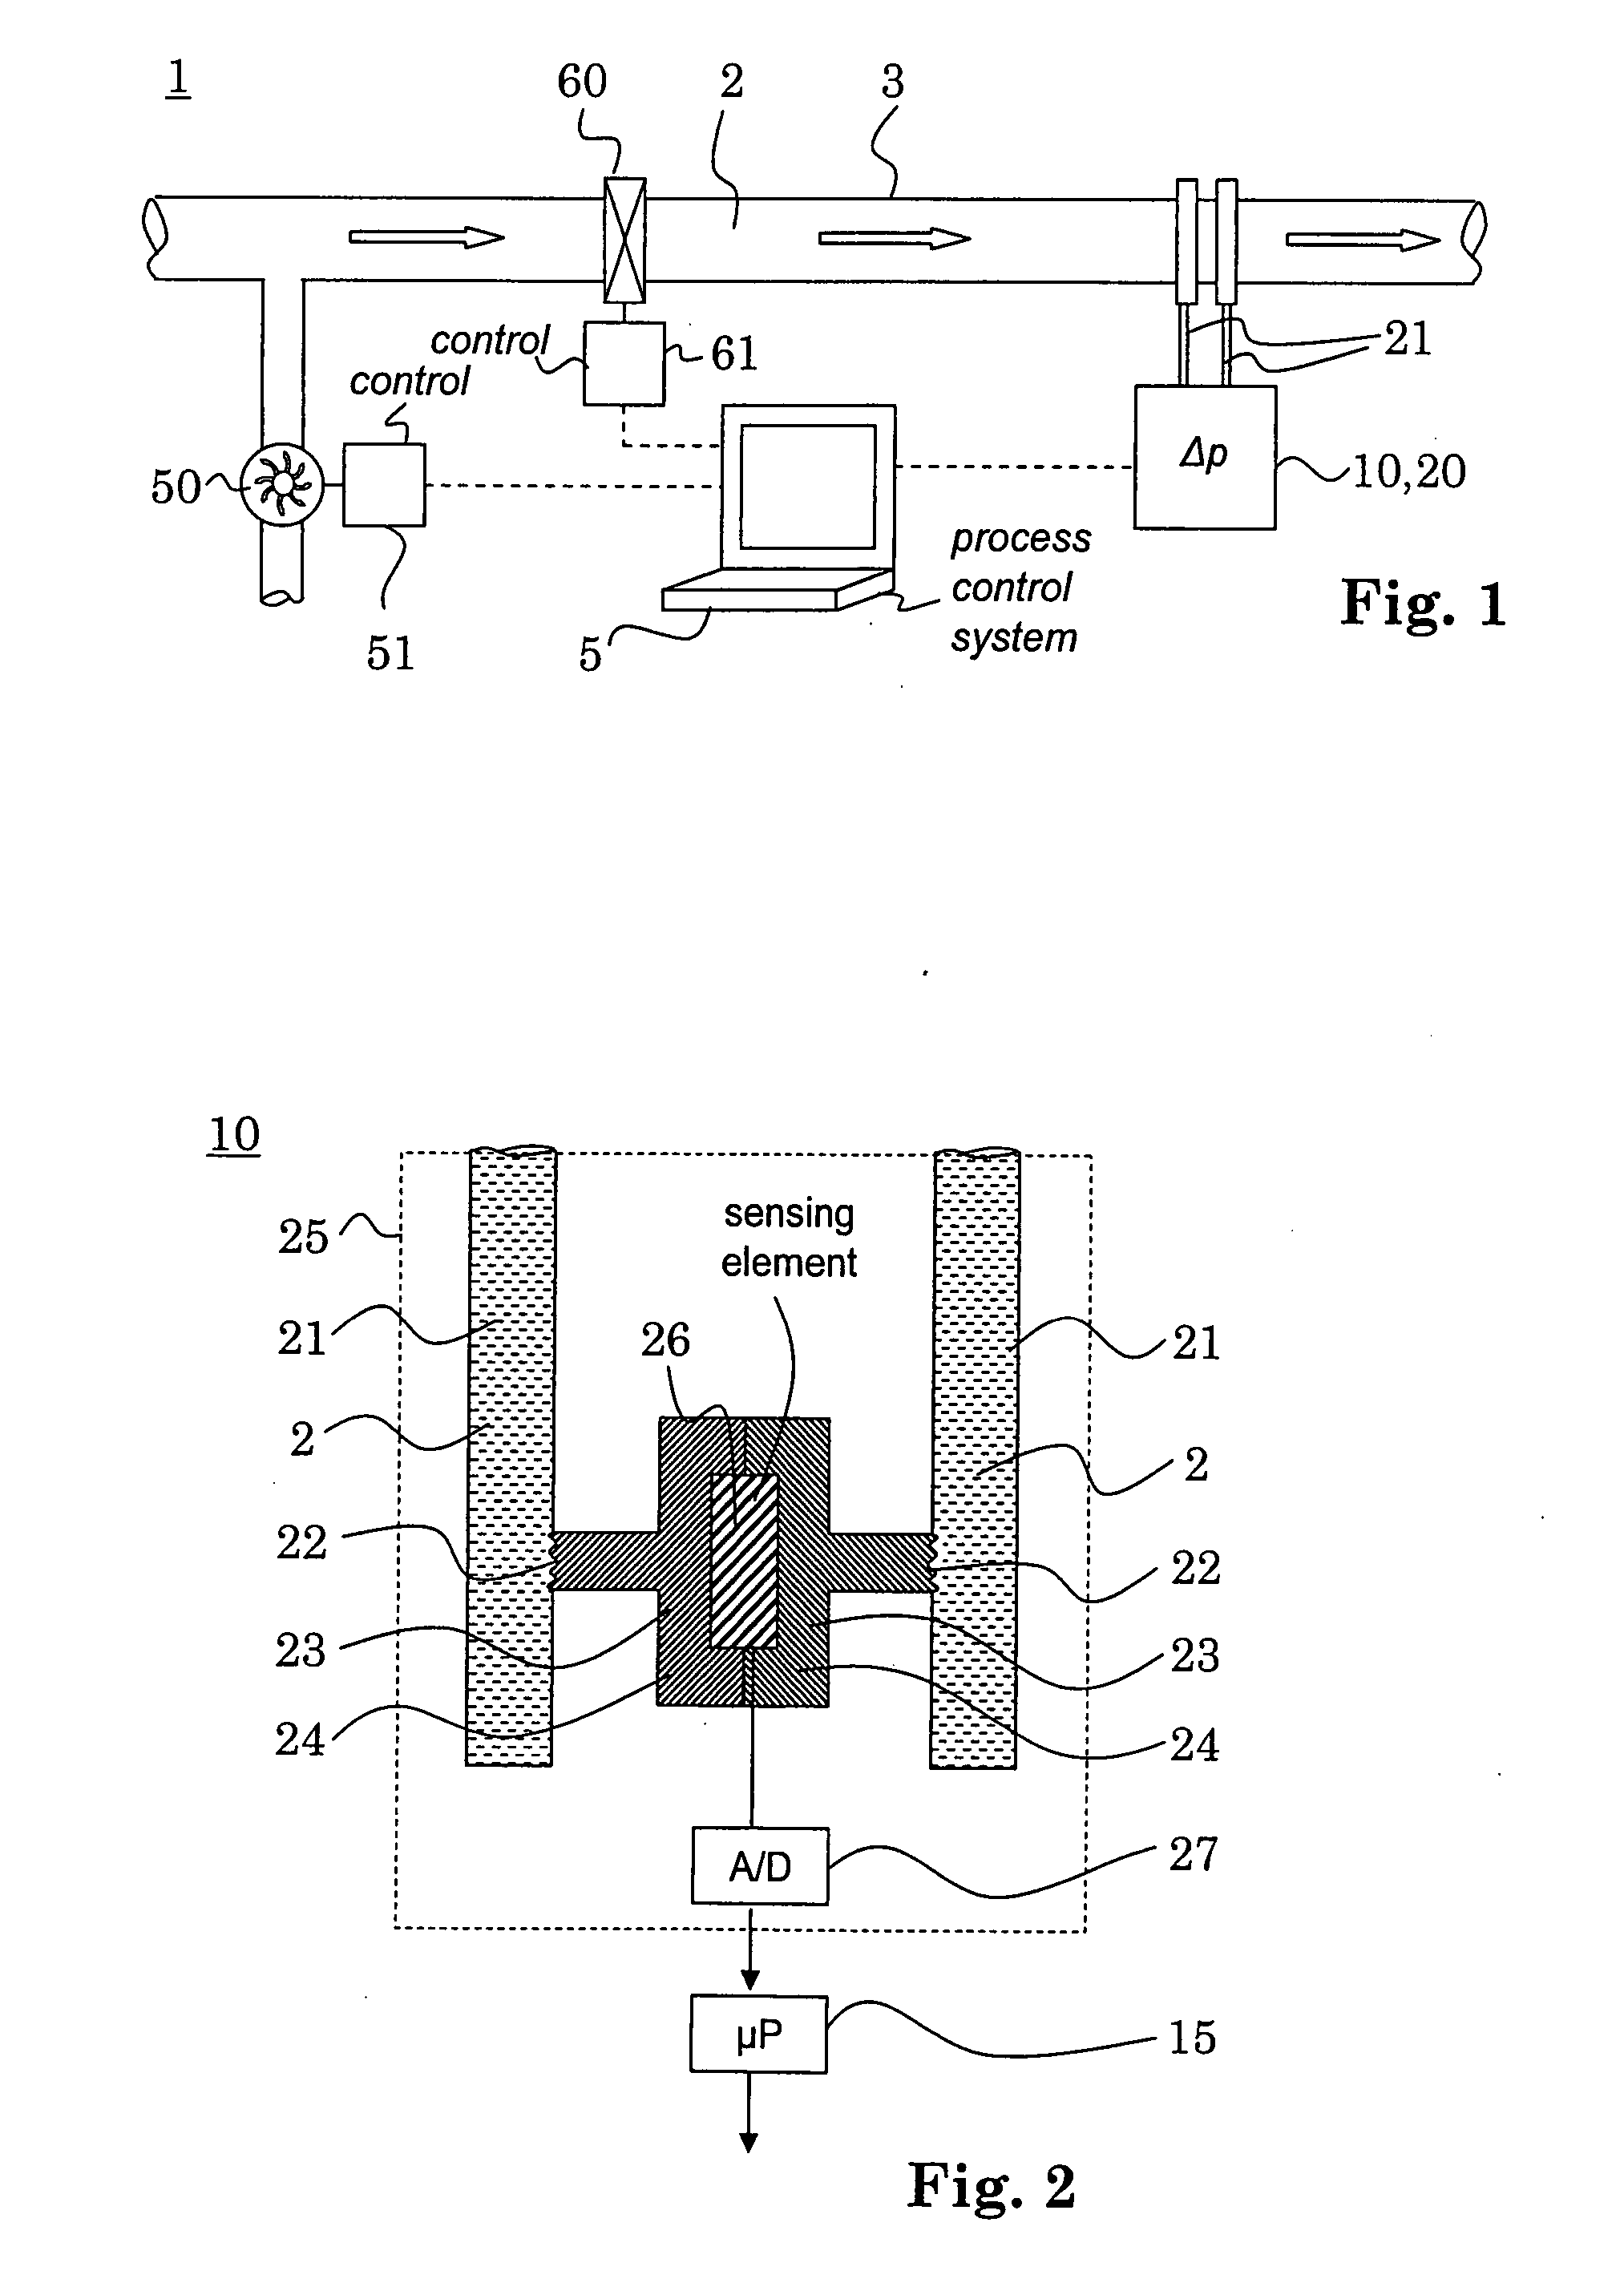 Diagnostic device for use in process control system